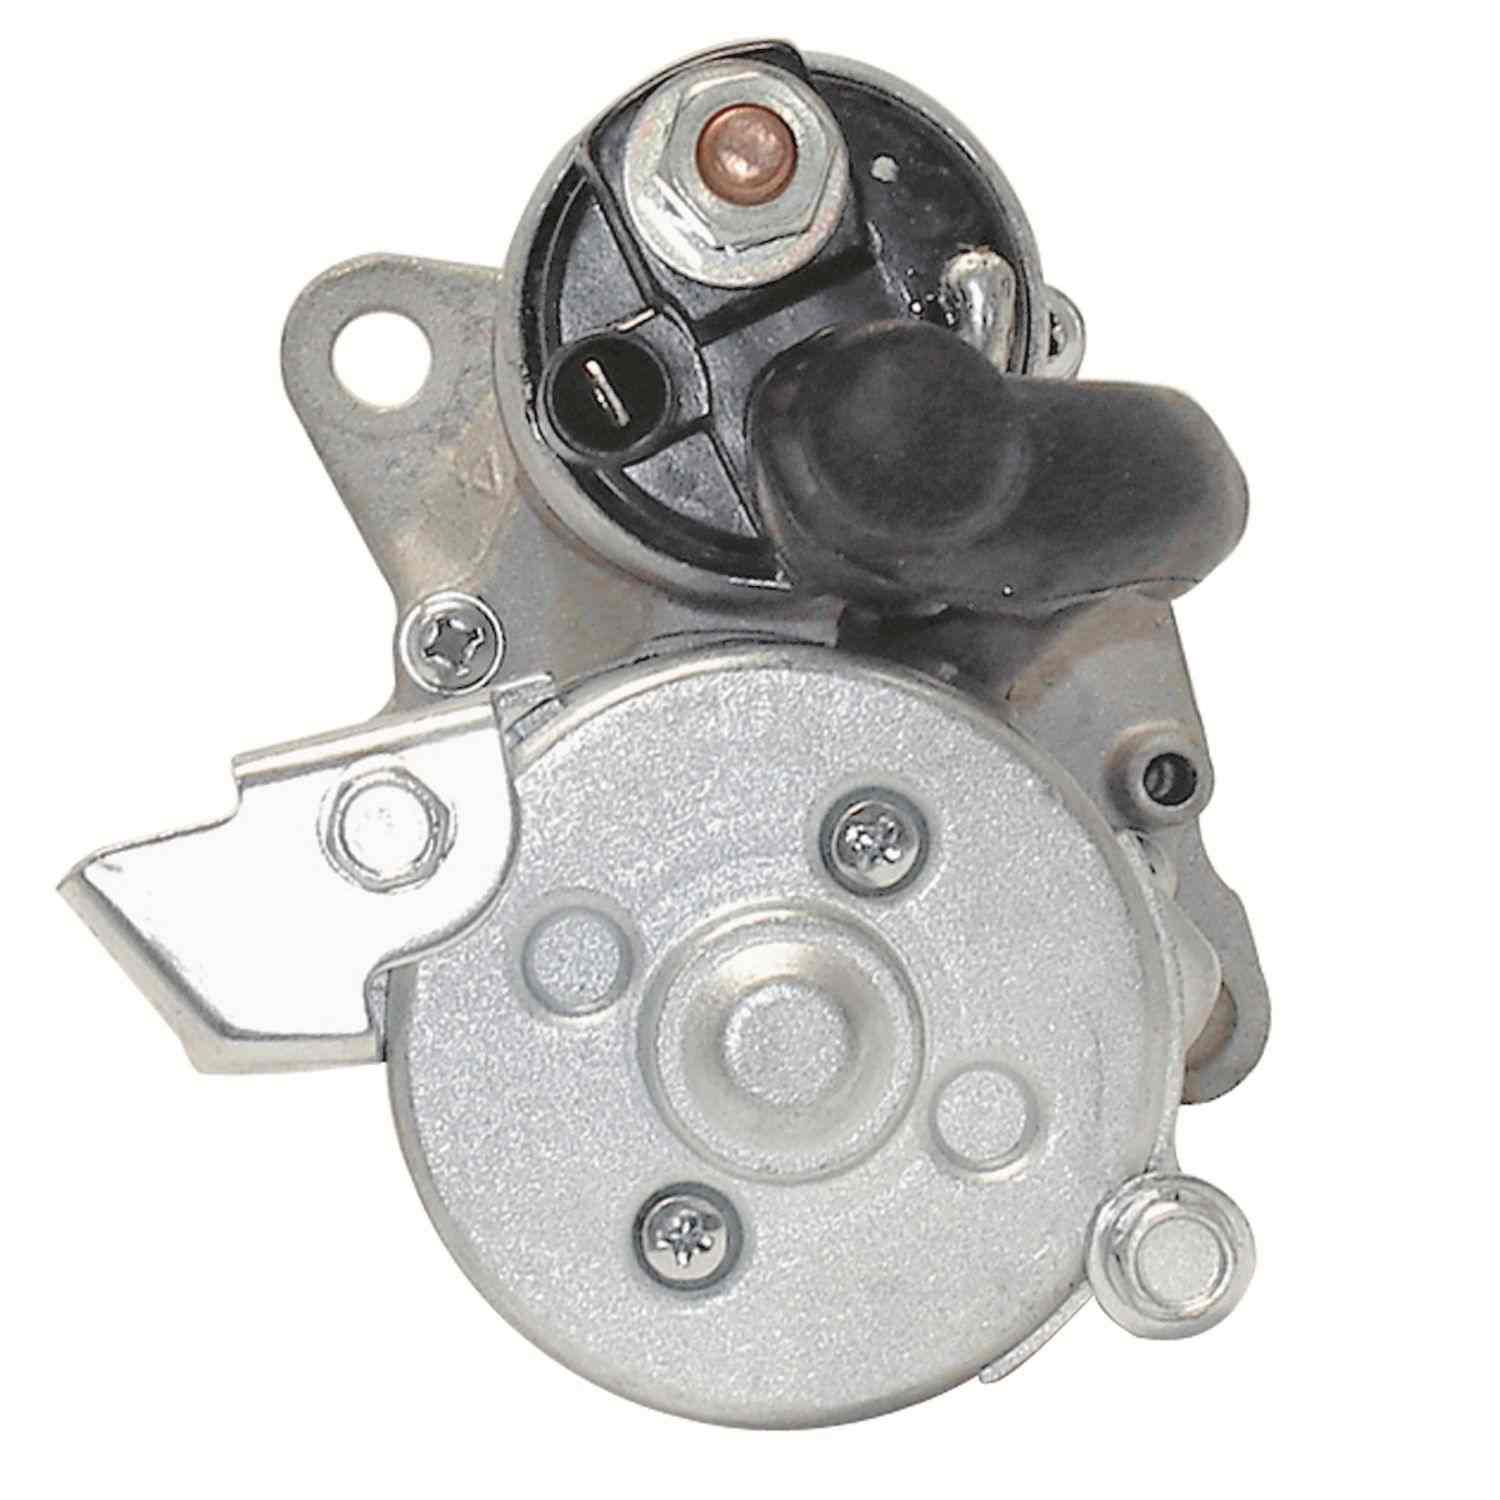 ACDELCO GOLD/PROFESSIONAL - Reman Starter Motor - DCC 336-1470